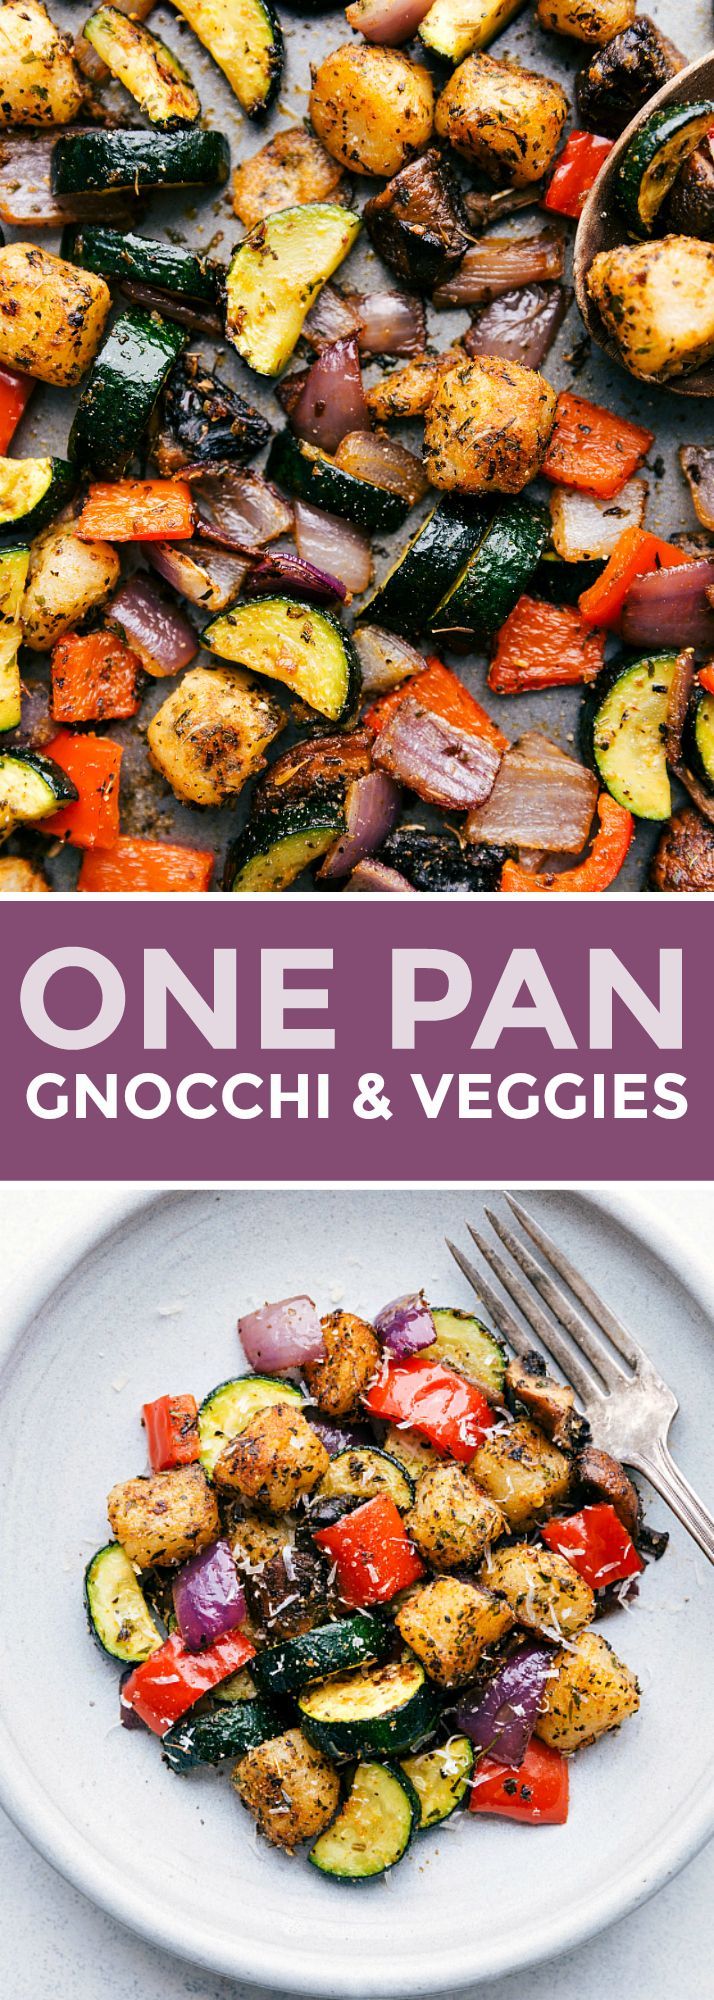 ONE PAN Baked Gnocchi & Veggies -   6 healthy recipes Vegetables oven baked ideas